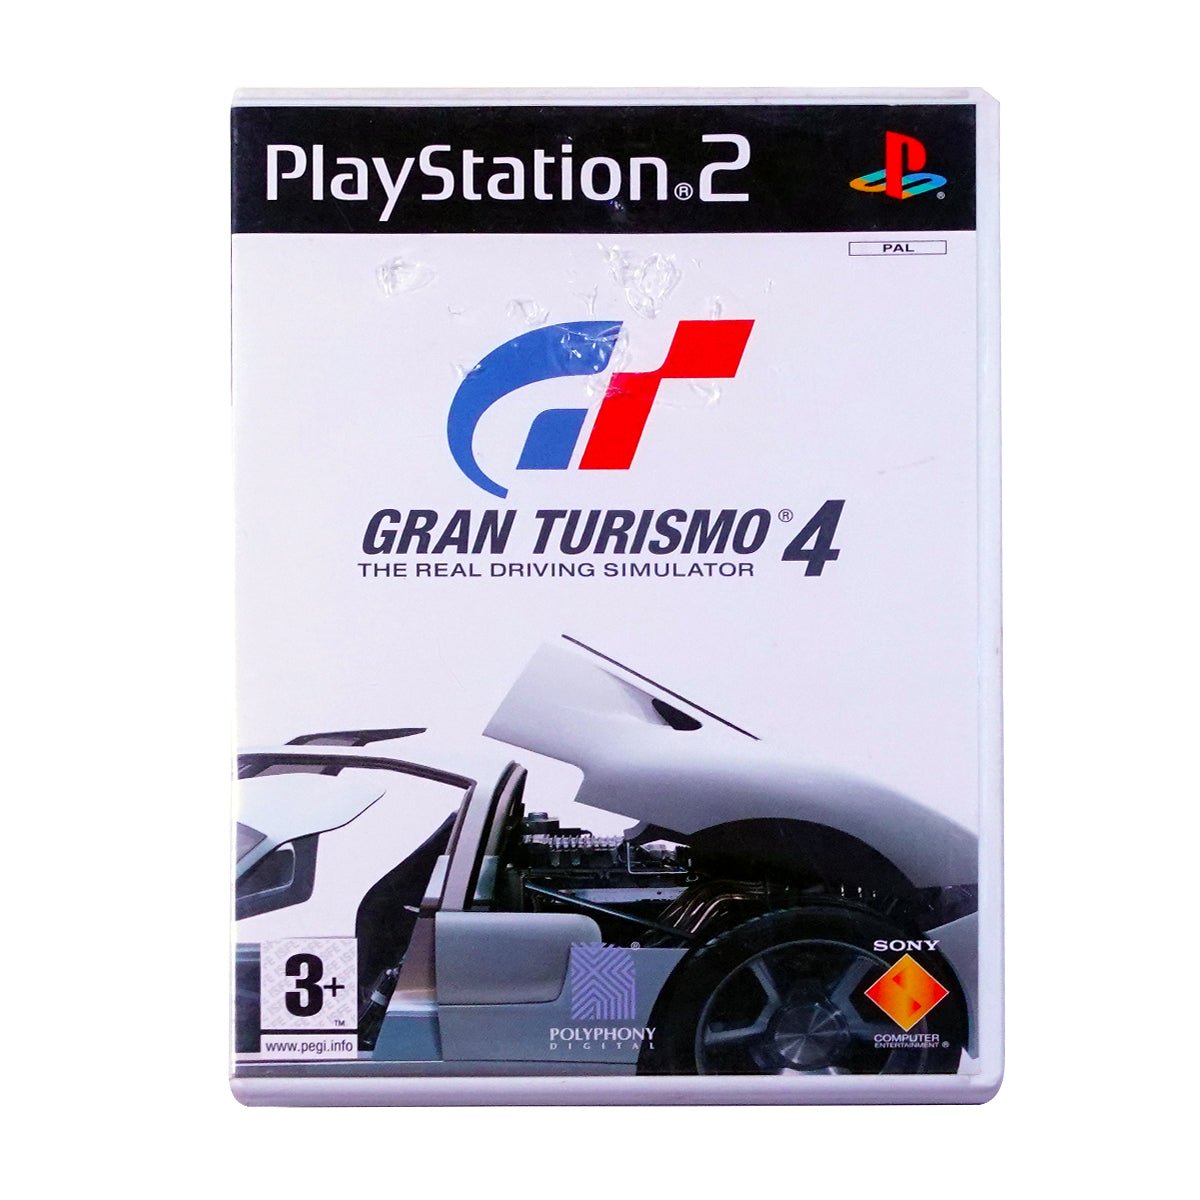 (Pre-Owned) Gran Turismo 4 The Real Driving Simulator - PlayStation 2 Game - ريترو - Store 974 | ستور ٩٧٤